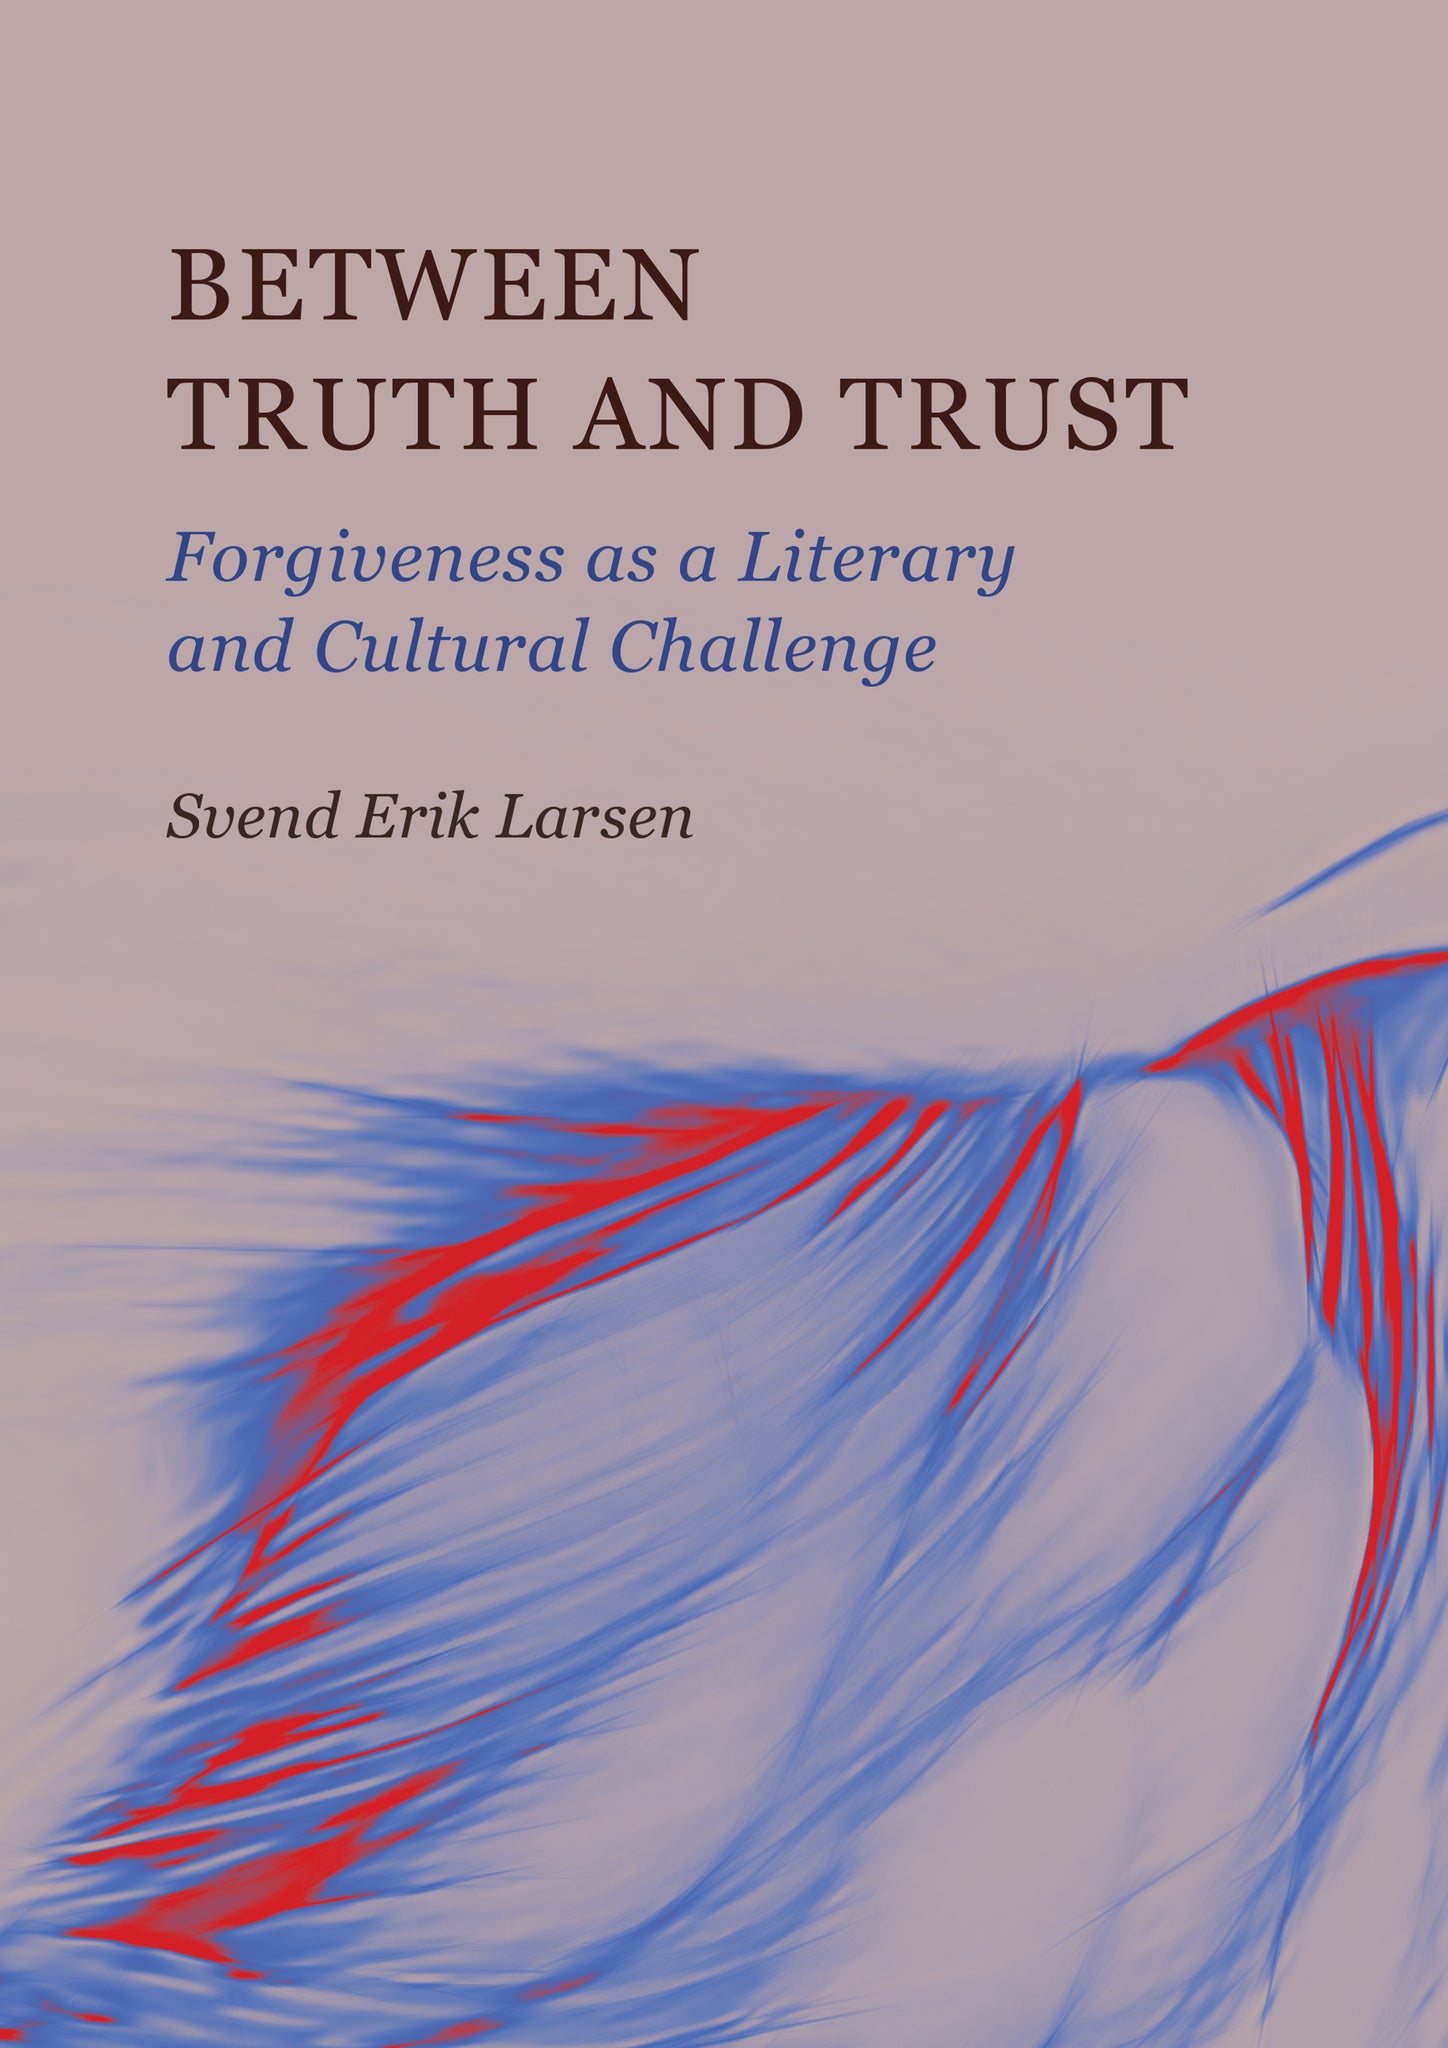 Between Truth and Trust: Forgiveness as a Literary and Cultural Challenge